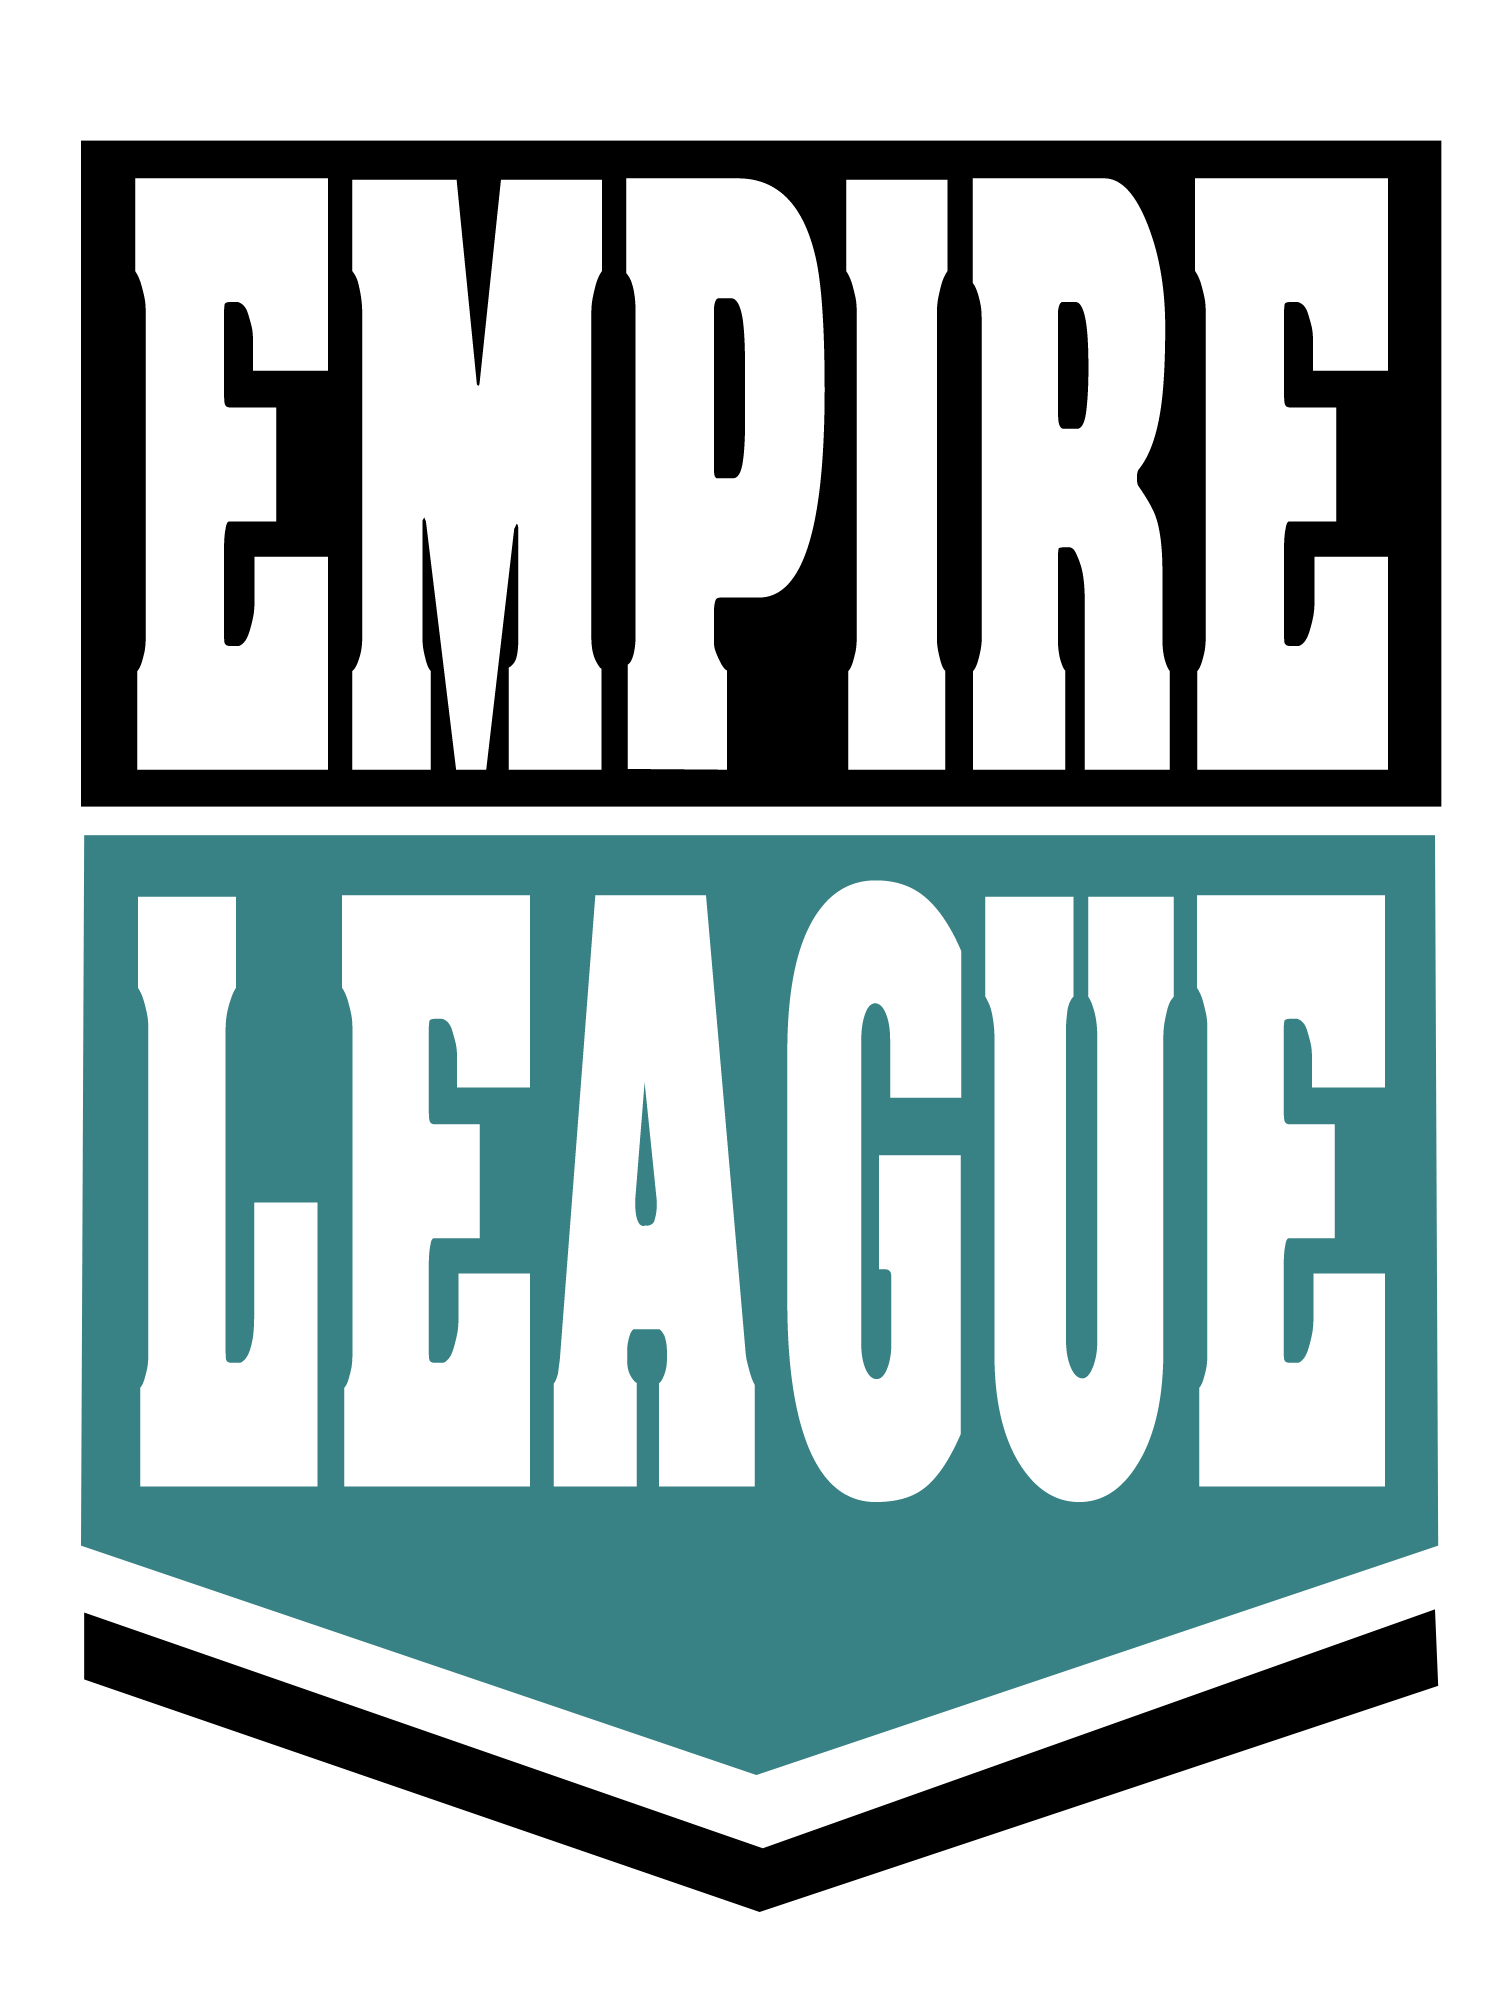 Welcome to the Empire Baseball League